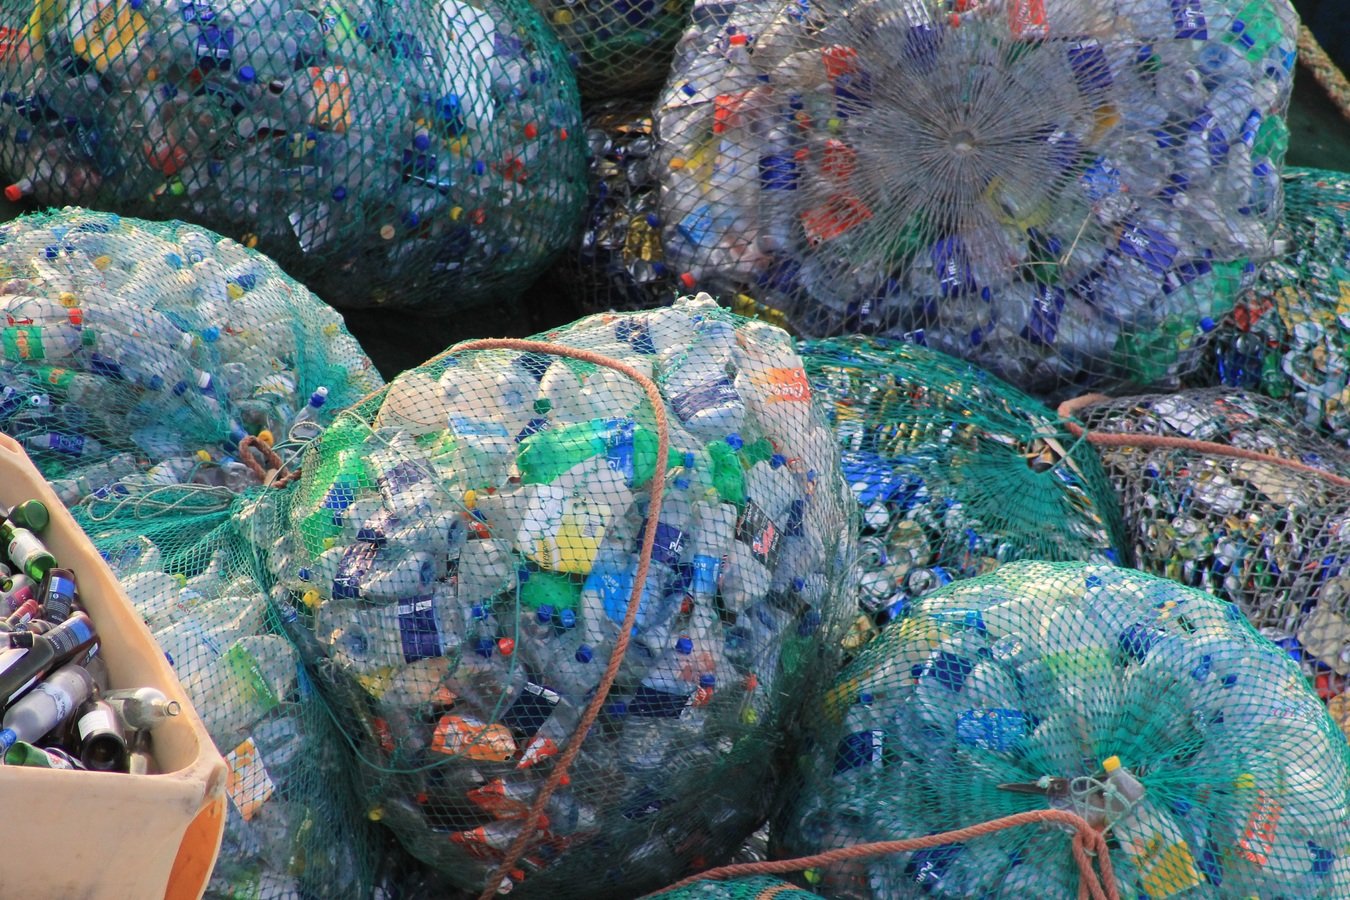 Europe's waste plastic represents more than €10 billion in lost resources each year.